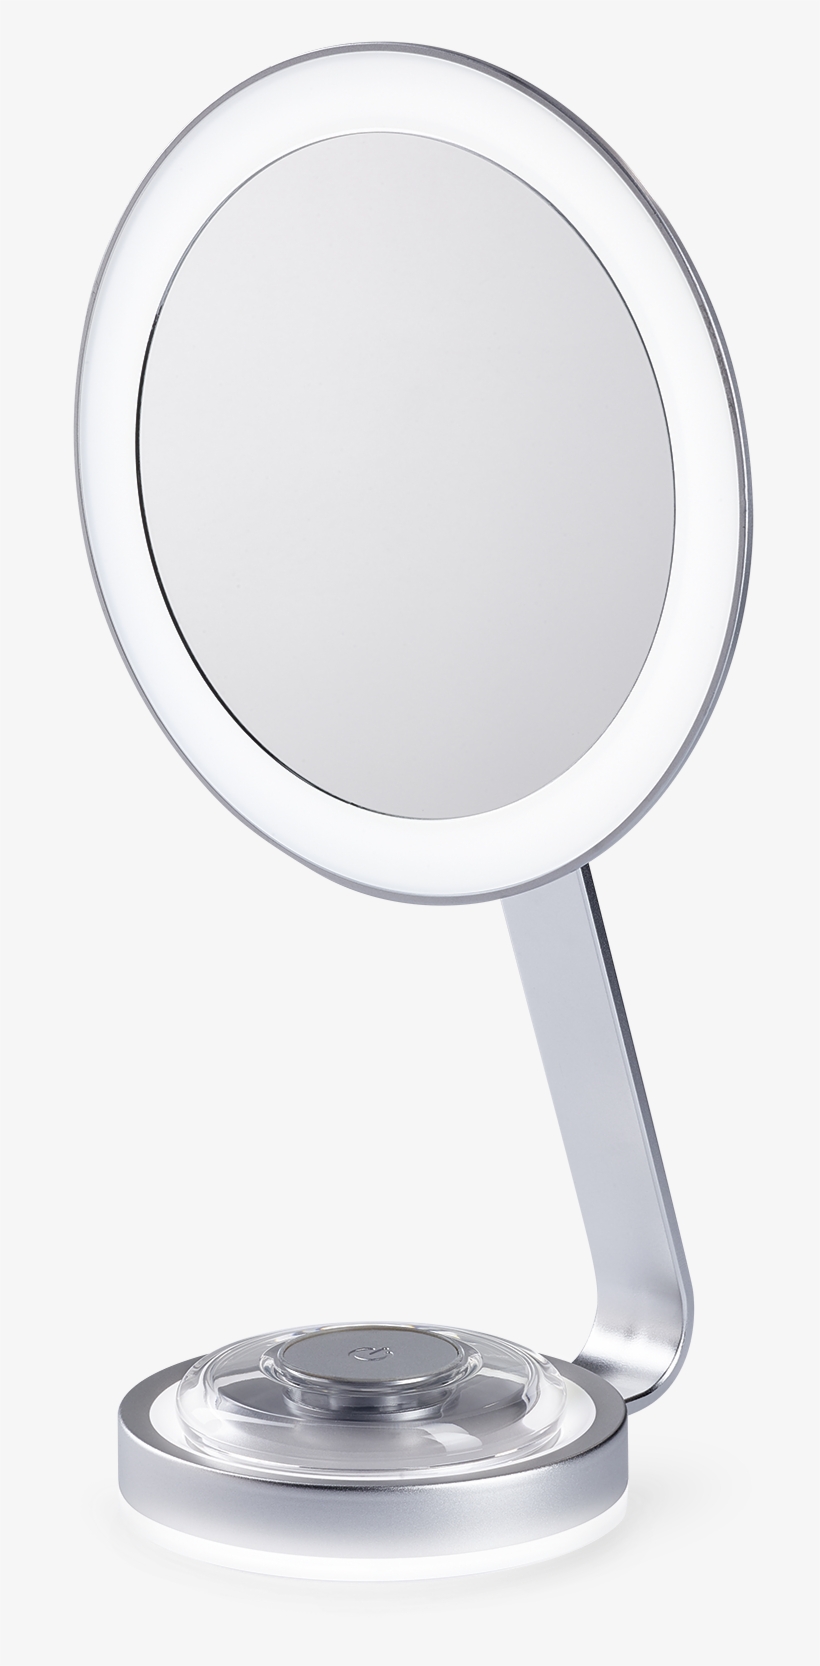 See Yourself In A New Light With This Led Magnification - Circle, transparent png #3779724